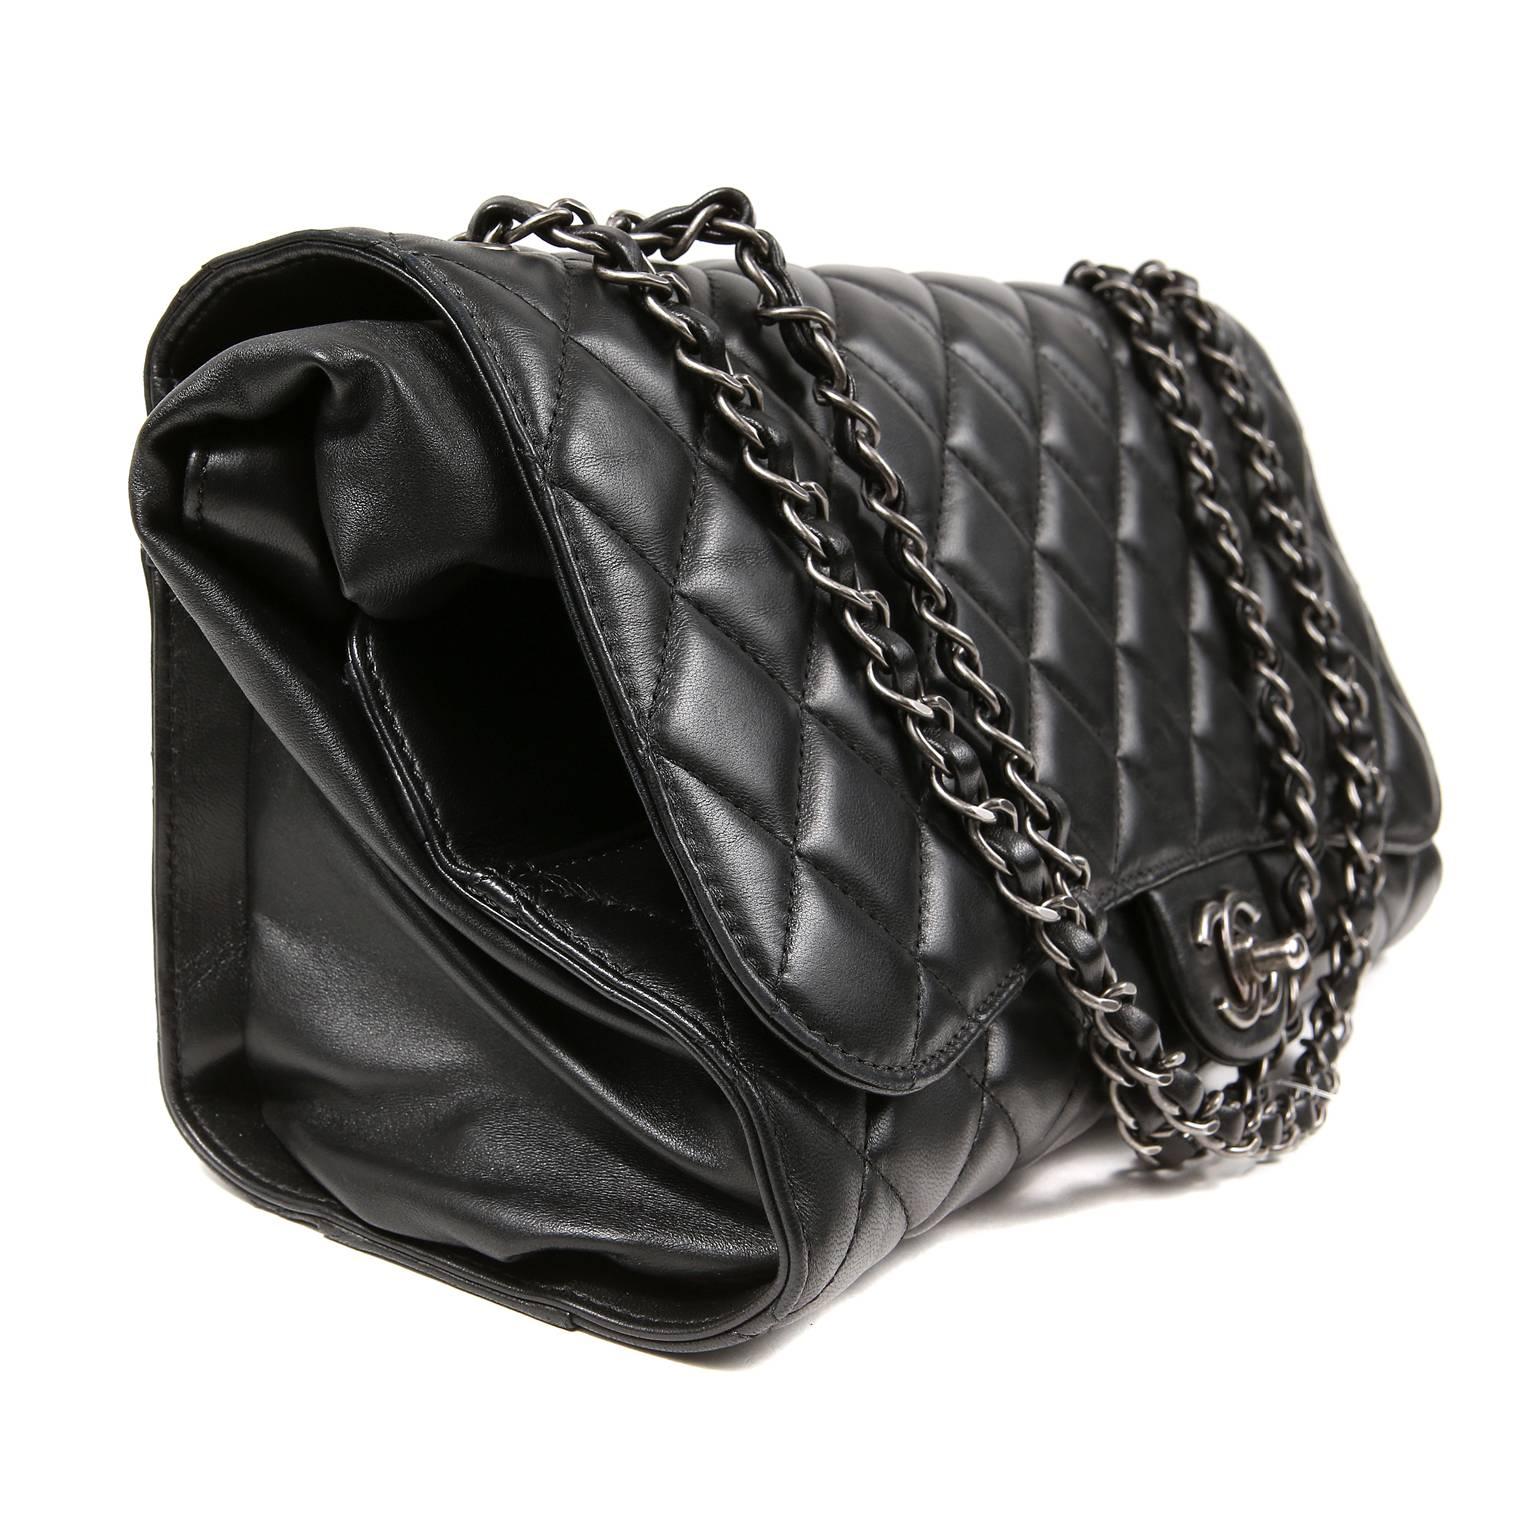 Chanel Classic Supermarket Drawstring Shopping Bag- PRISTINE
  From the 2014 Fall Winter Collection, this edgy Classic Flap converts to a drawstring tote- two bags in one. 

Black lambskin is quilted in signature Chanel diamond stitched pattern.